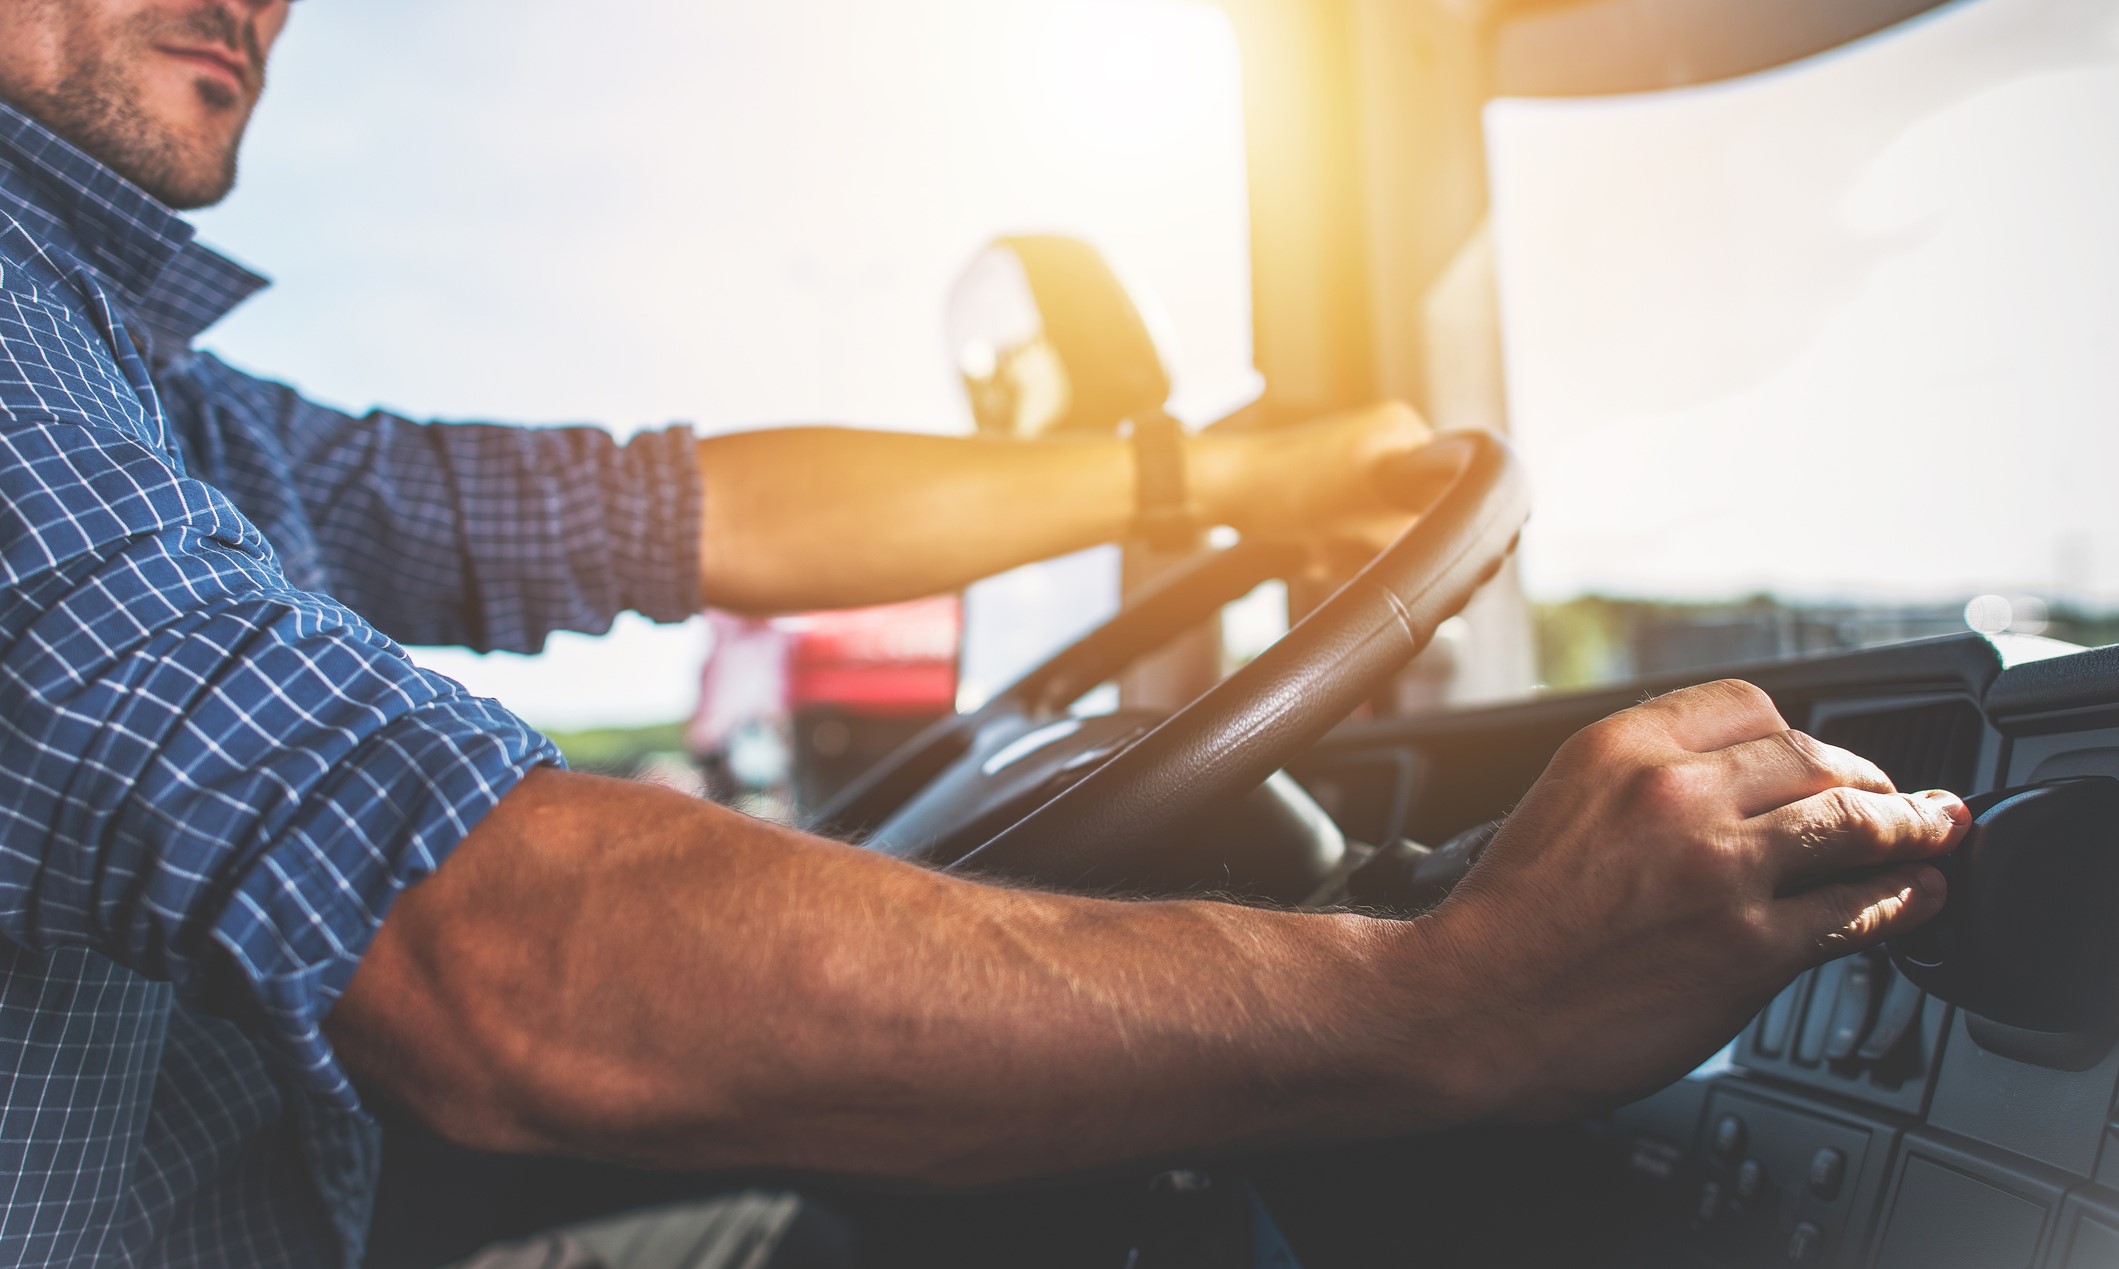 The Trucking Industry Gears Up for Major Change in 2019